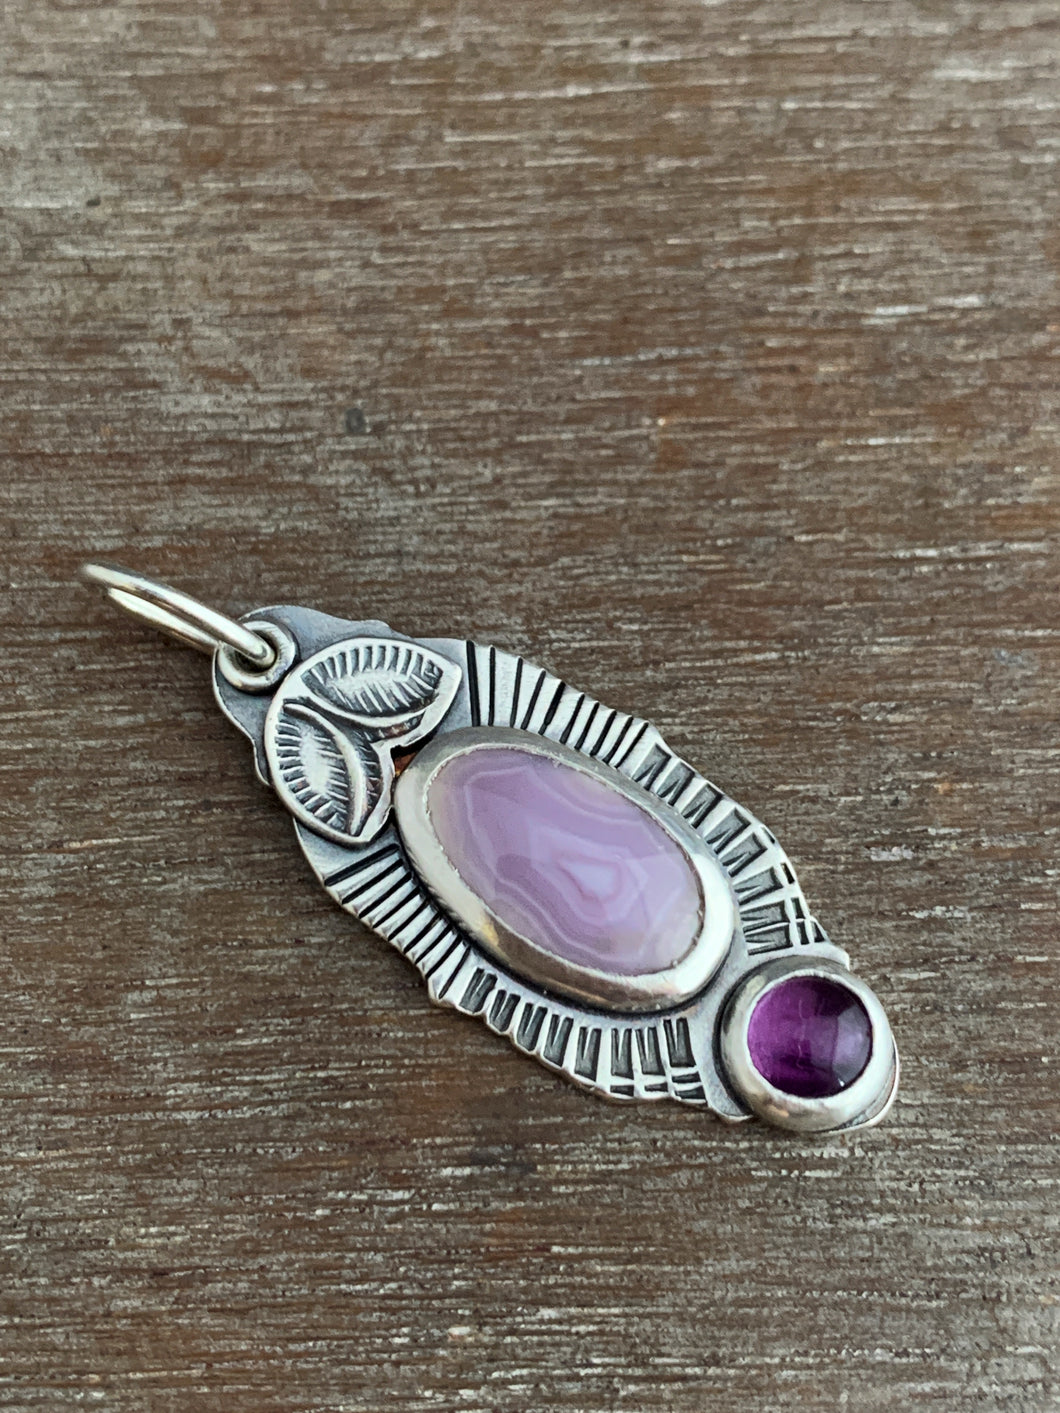 Agate and amethyst charm